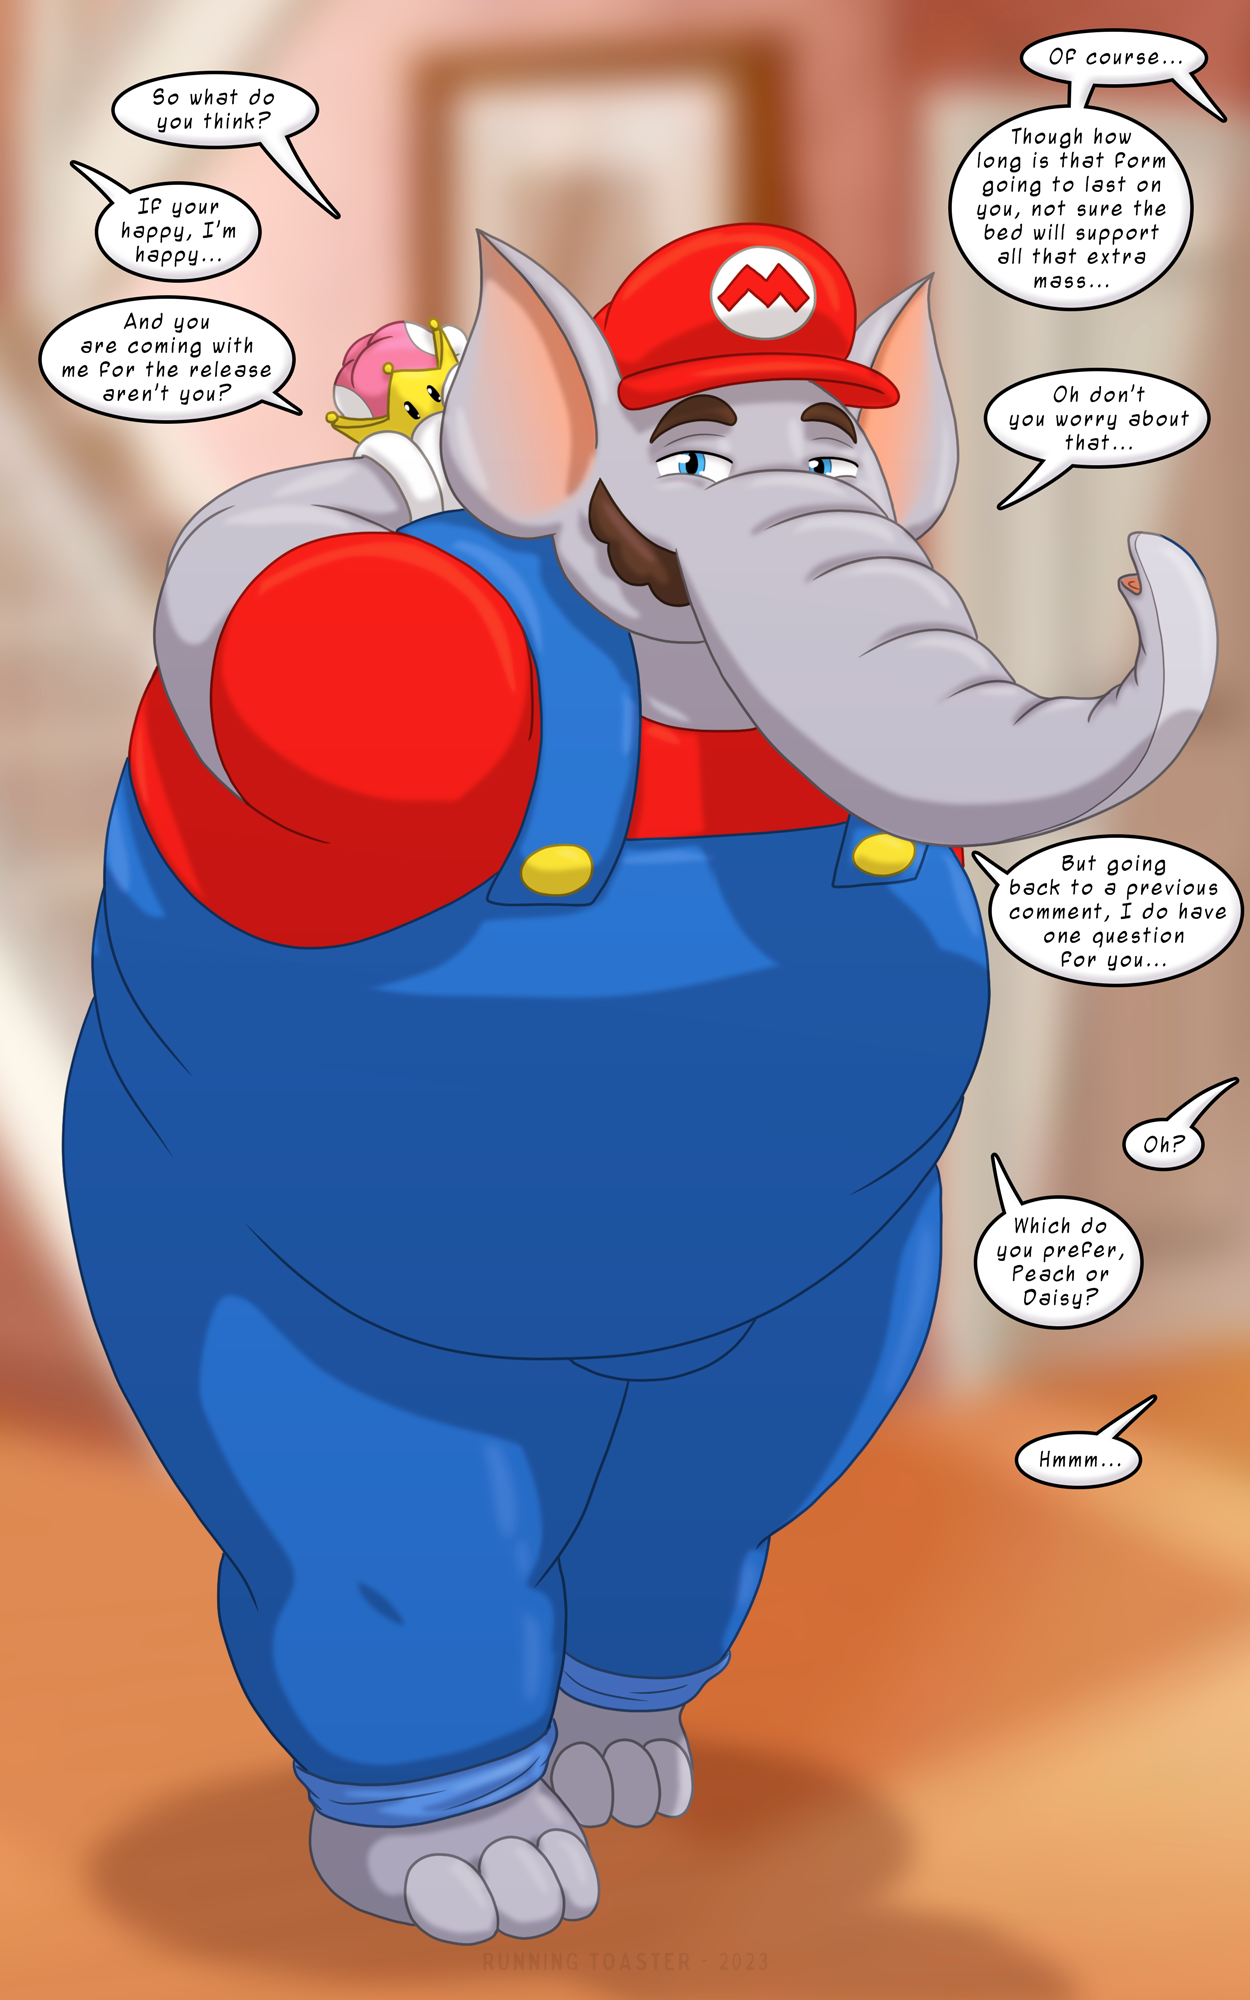 Me, Tails and The Mario Bros Going Out For A Run by PurpleG64 on DeviantArt